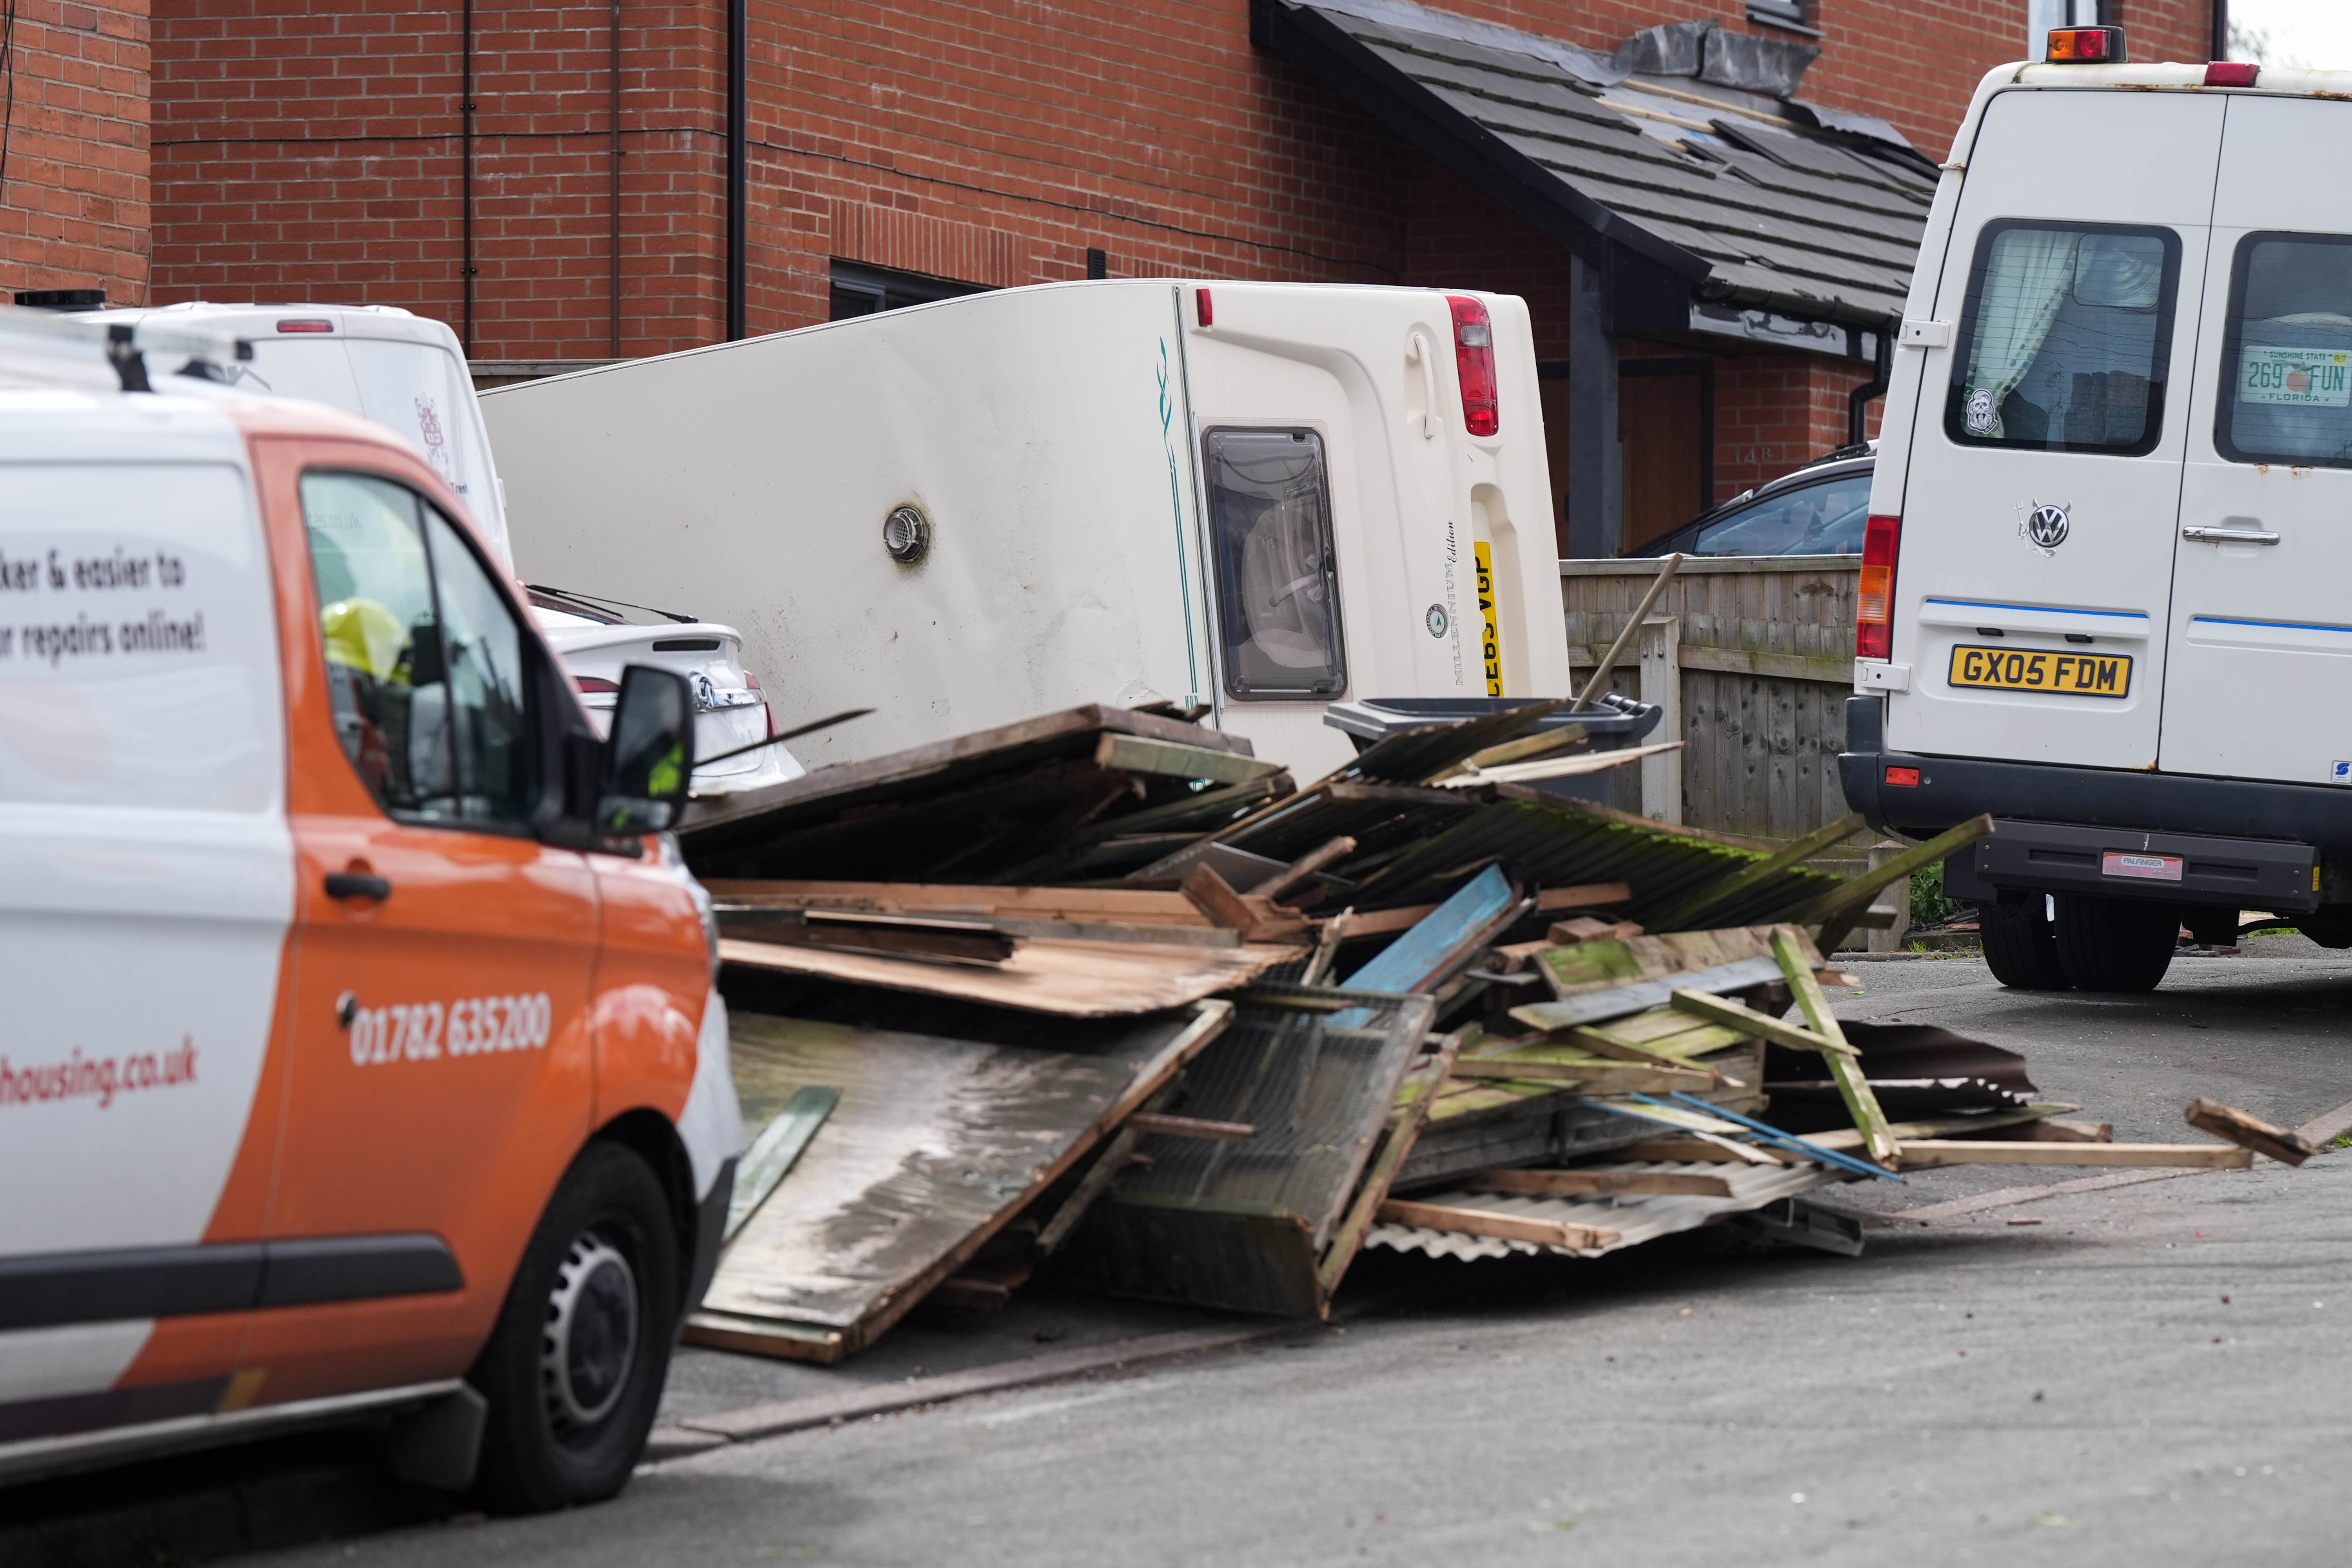 Resident Steven Hemming said his father’s caravan was knocked over in the bad weather